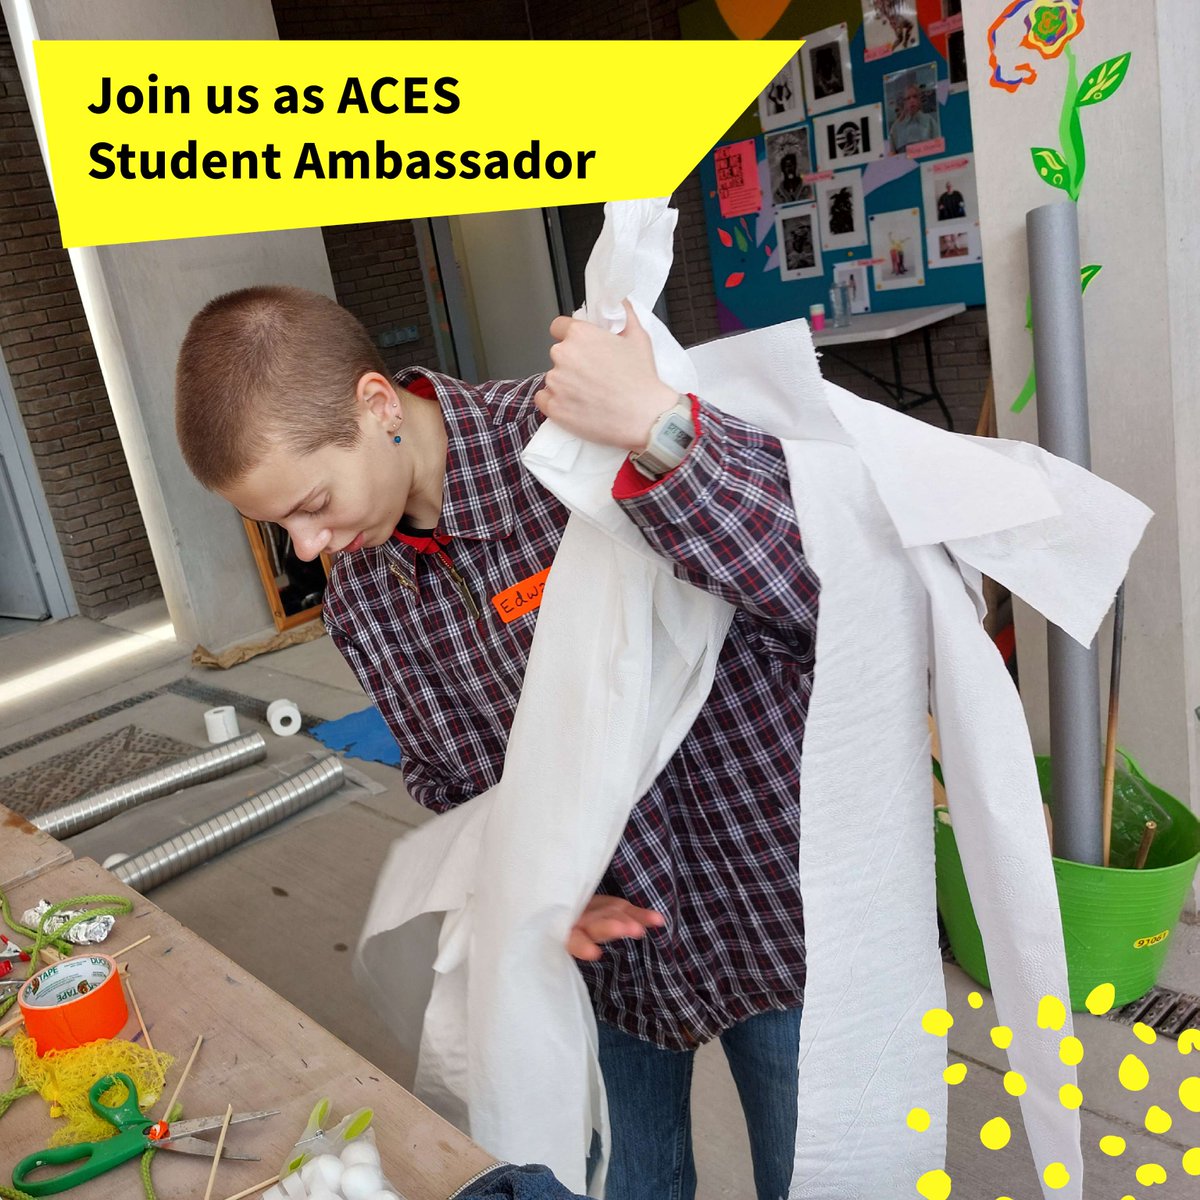 👉 Student Ambassadors sought! Join @UniofEdWPteam's Access to Creative Education in Scotland (ACES) programme to support under-represented and disadvantaged young people interested in studying art, design, or architecture. Closes 6 May. Find out more: edin.ac/49oTlWQ